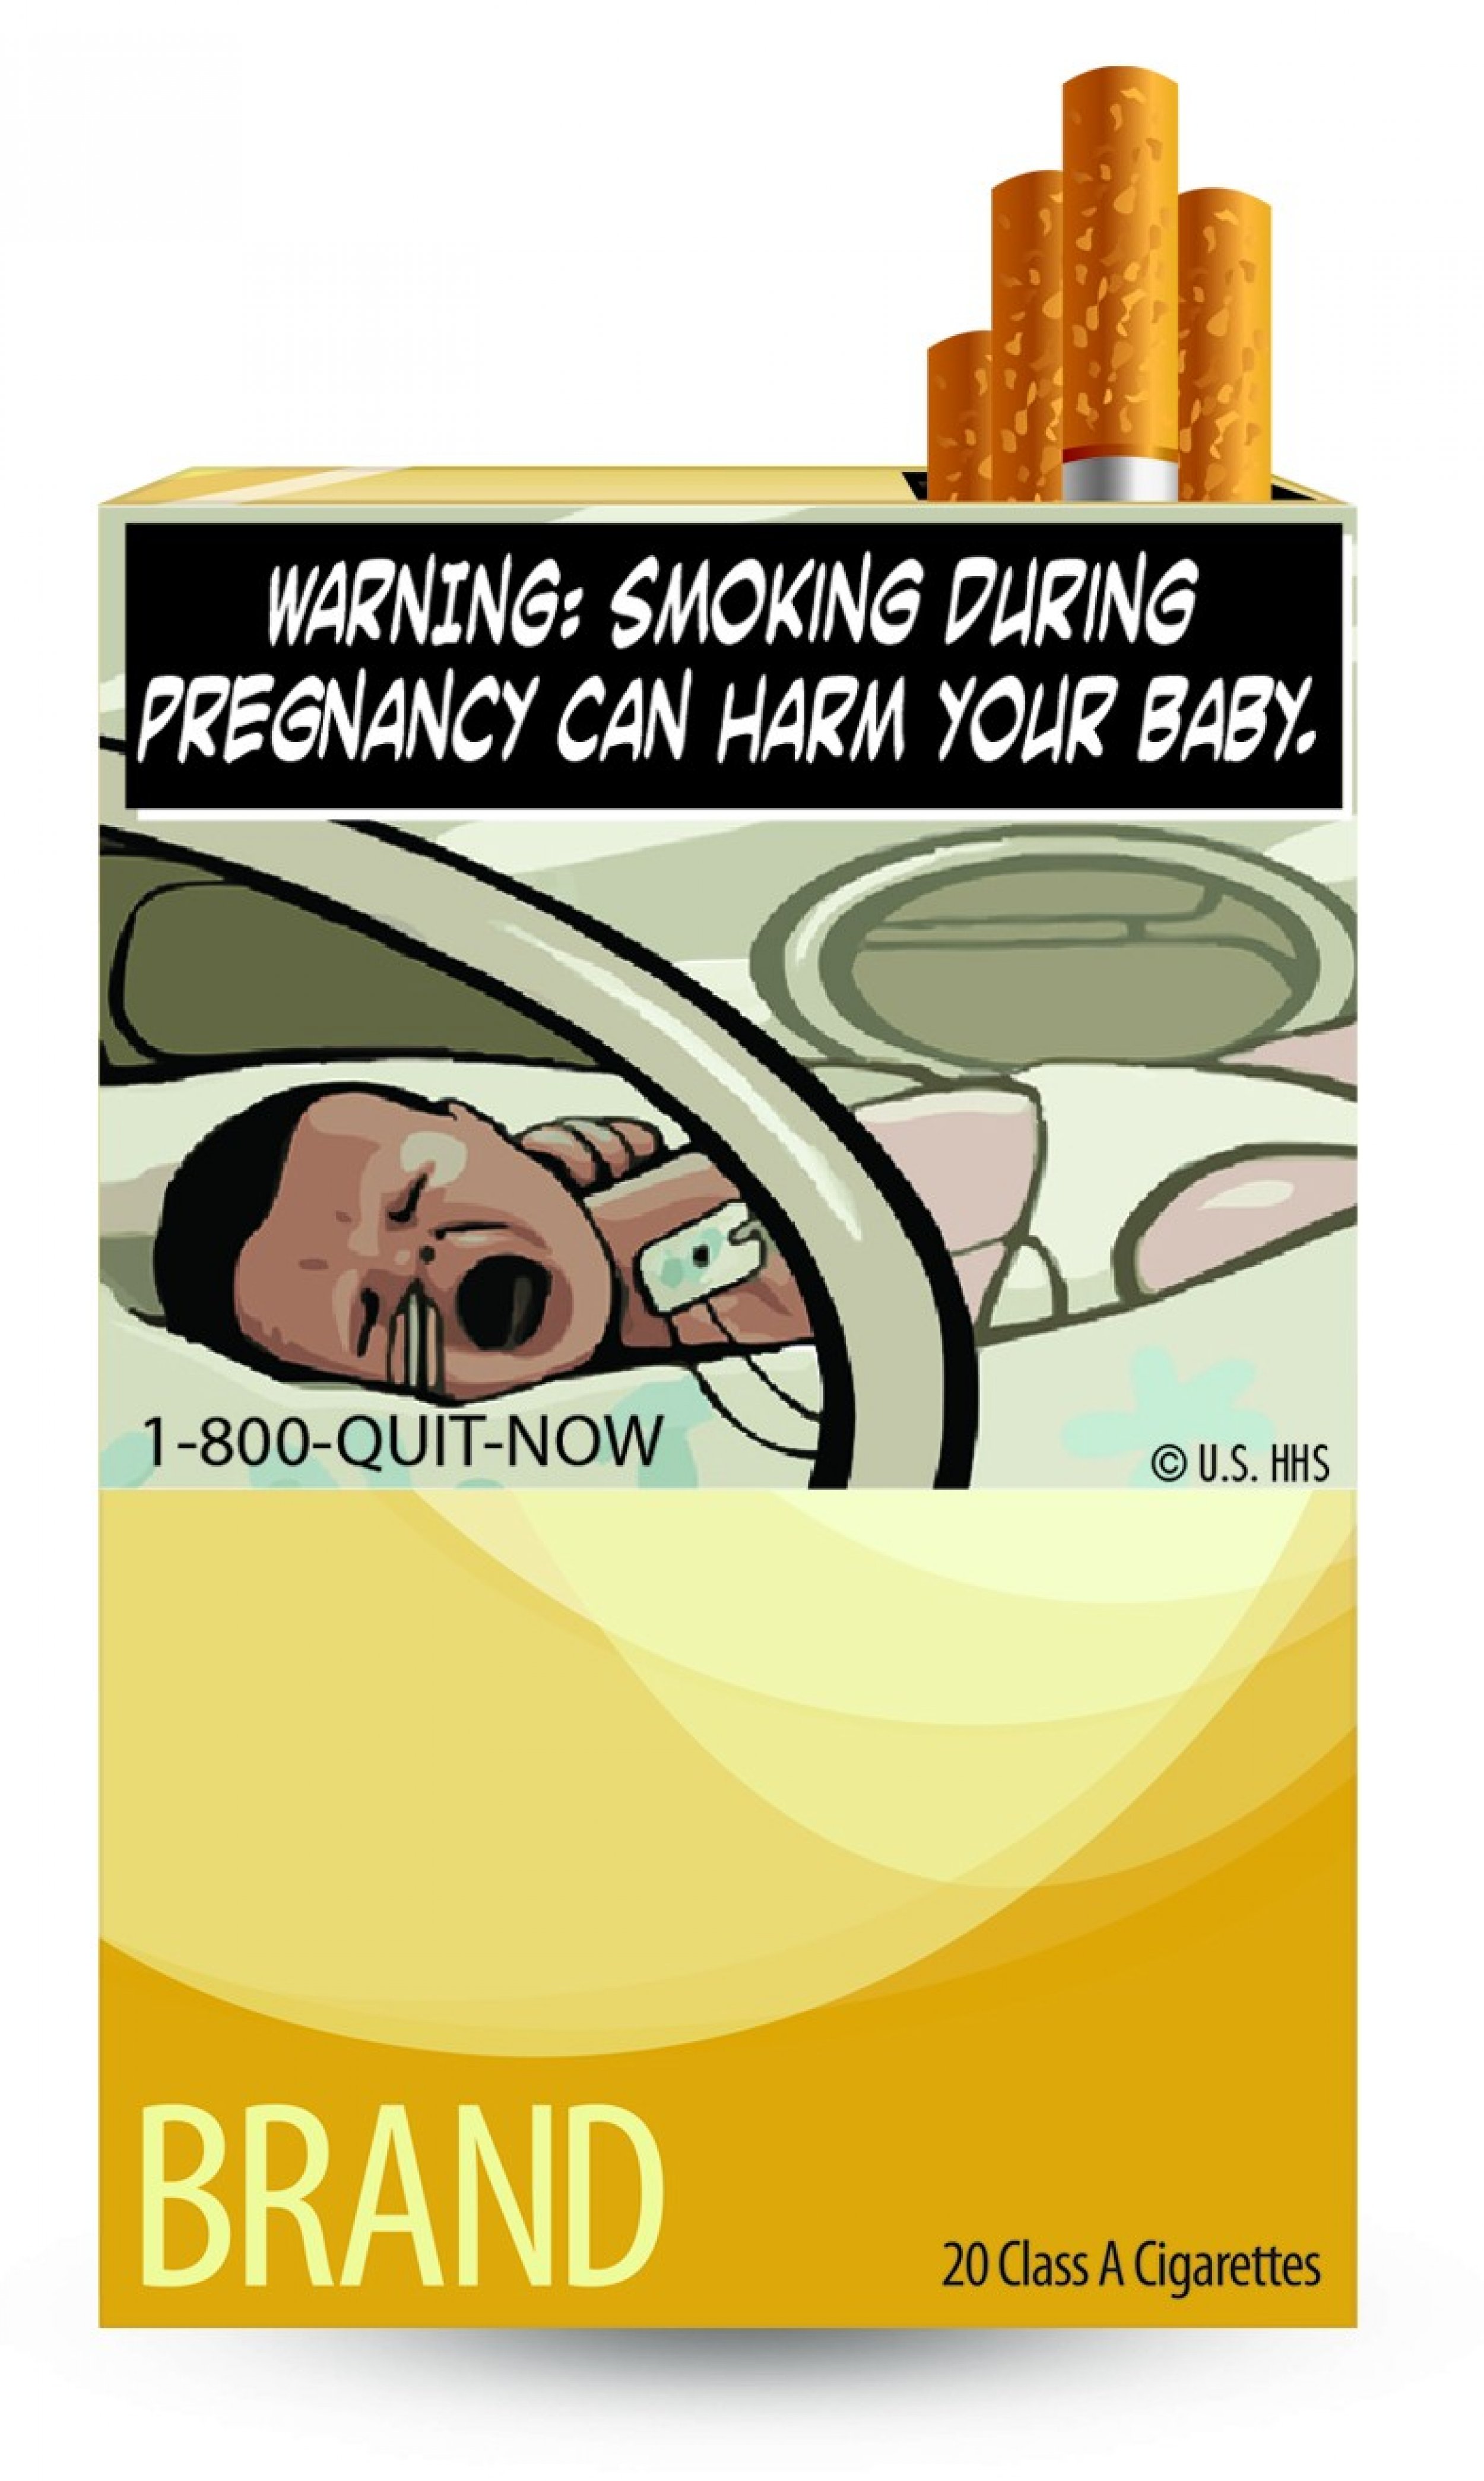 WARNING Smoking during pregnancy can harm your baby.